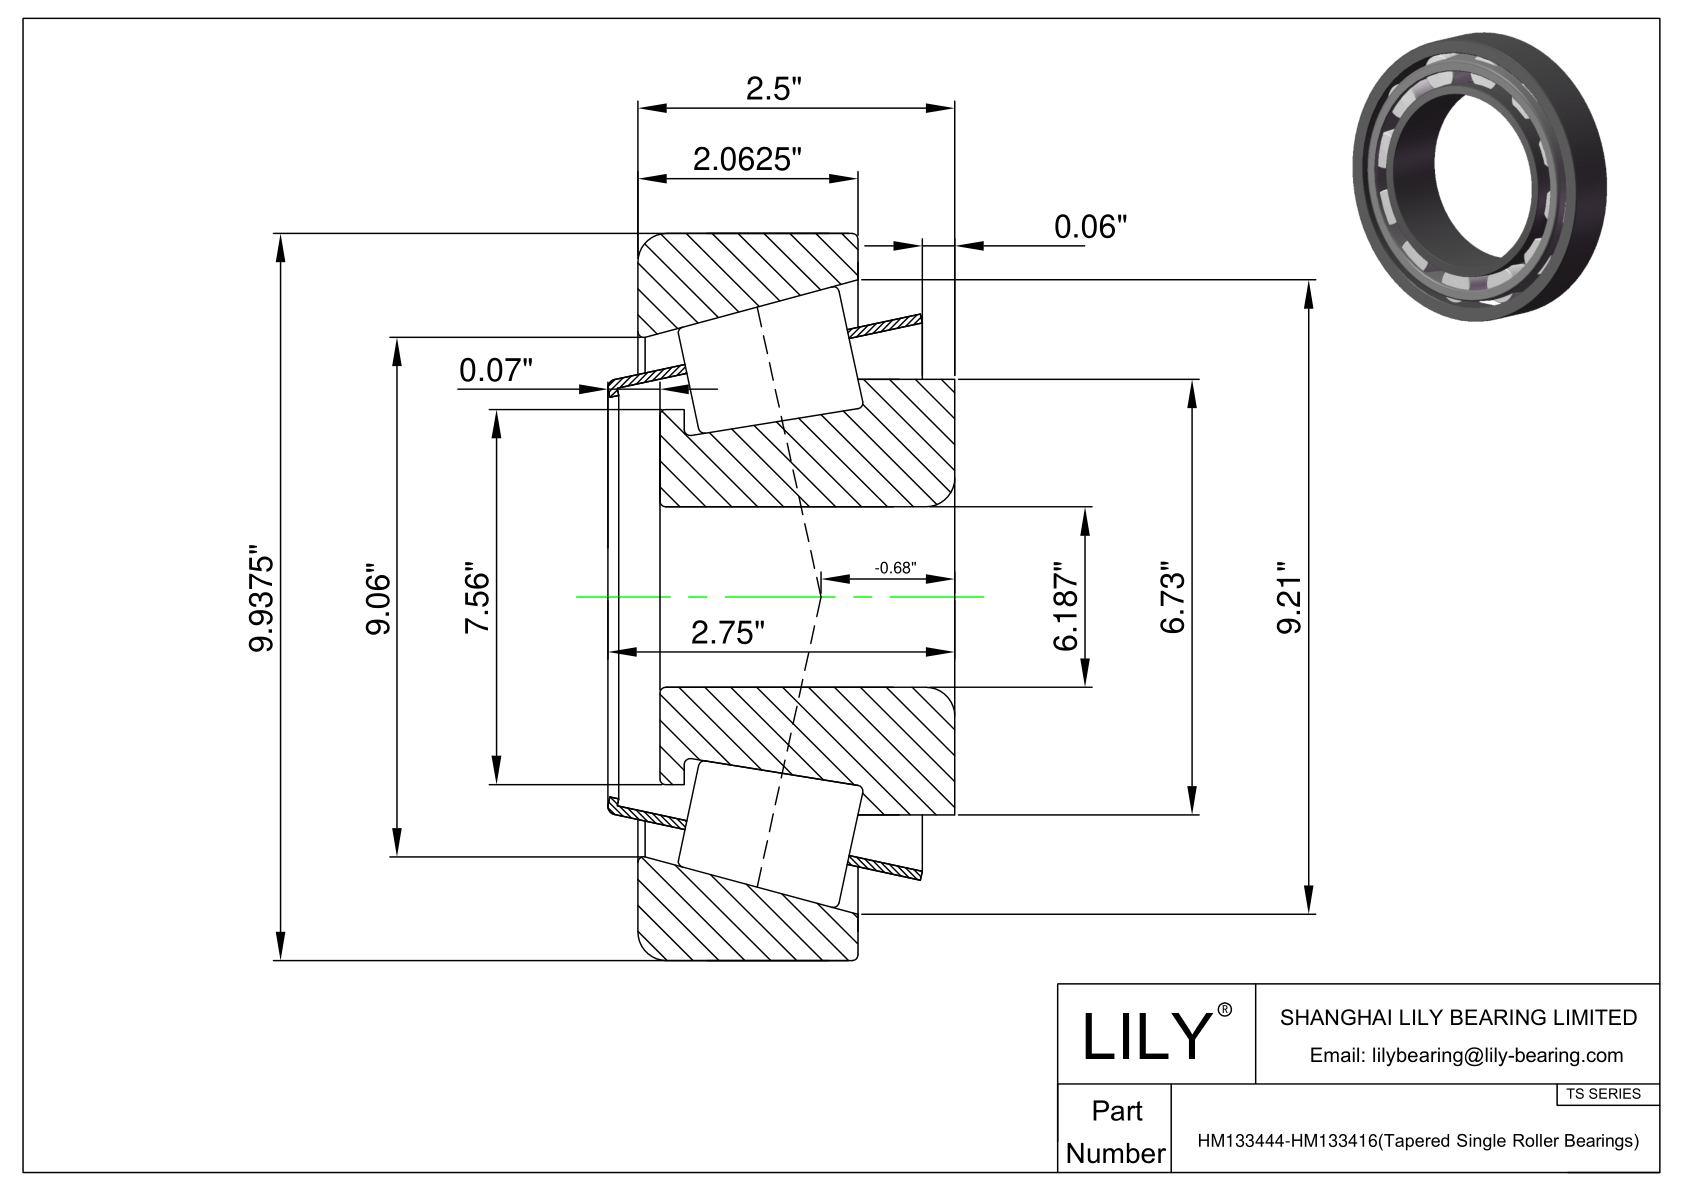 HM133444-HM133416 TS (Tapered Single Roller Bearings) (Imperial) cad drawing